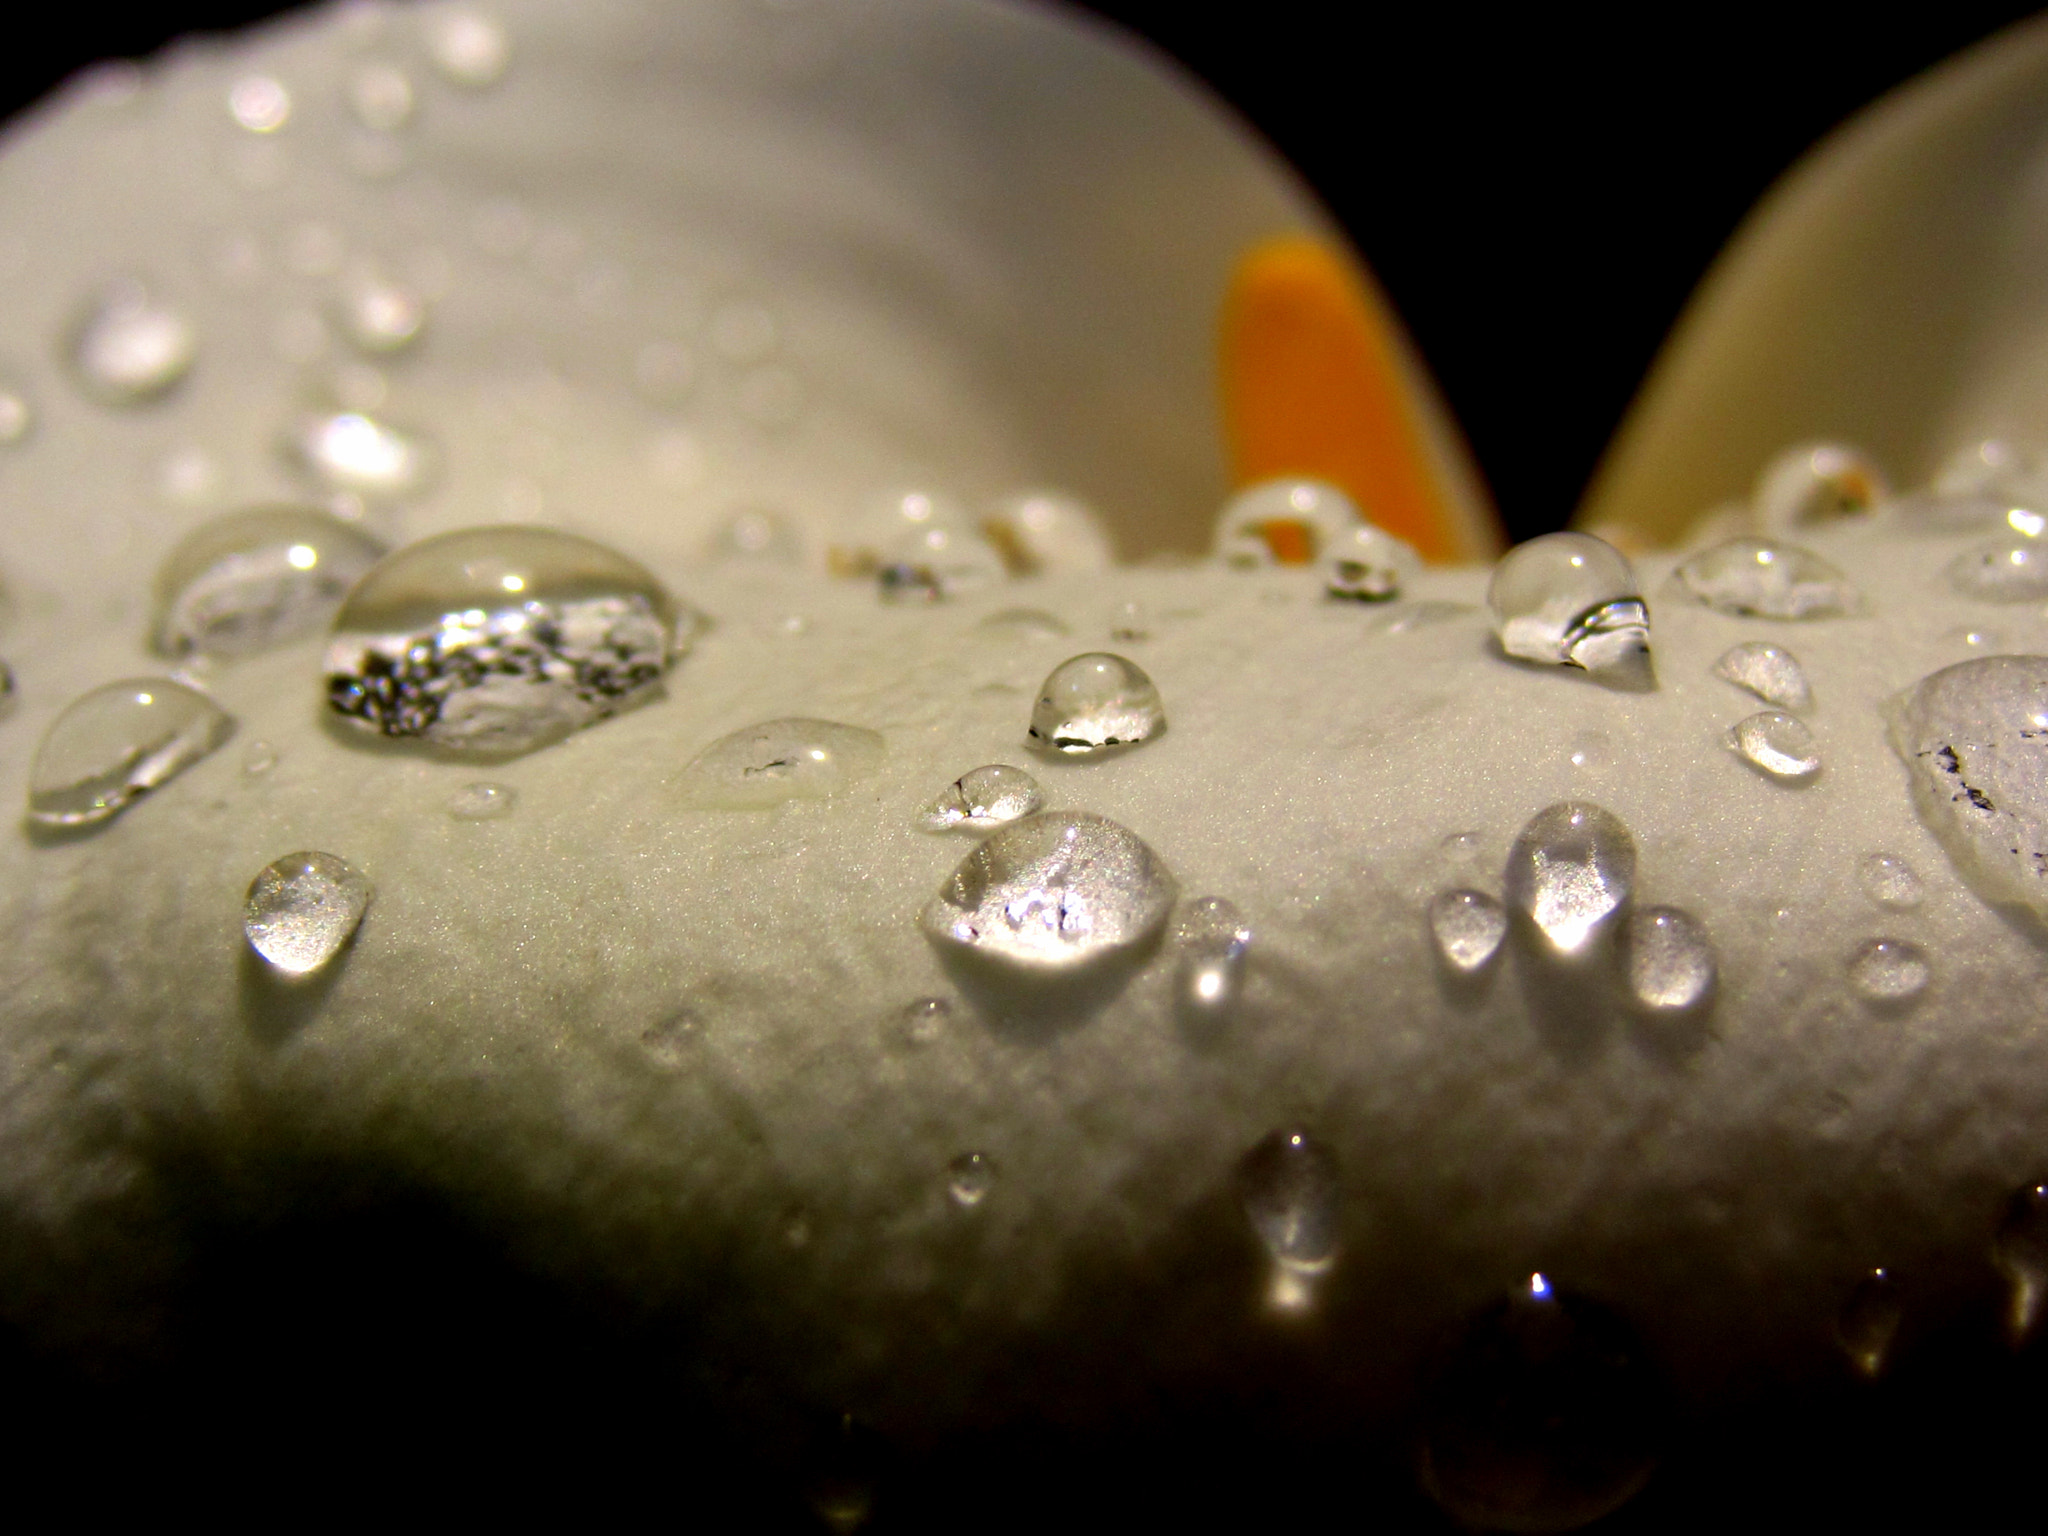 Canon PowerShot SD970 IS (Digital IXUS 990 IS / IXY Digital 830 IS) sample photo. Droplets on calla lily photography